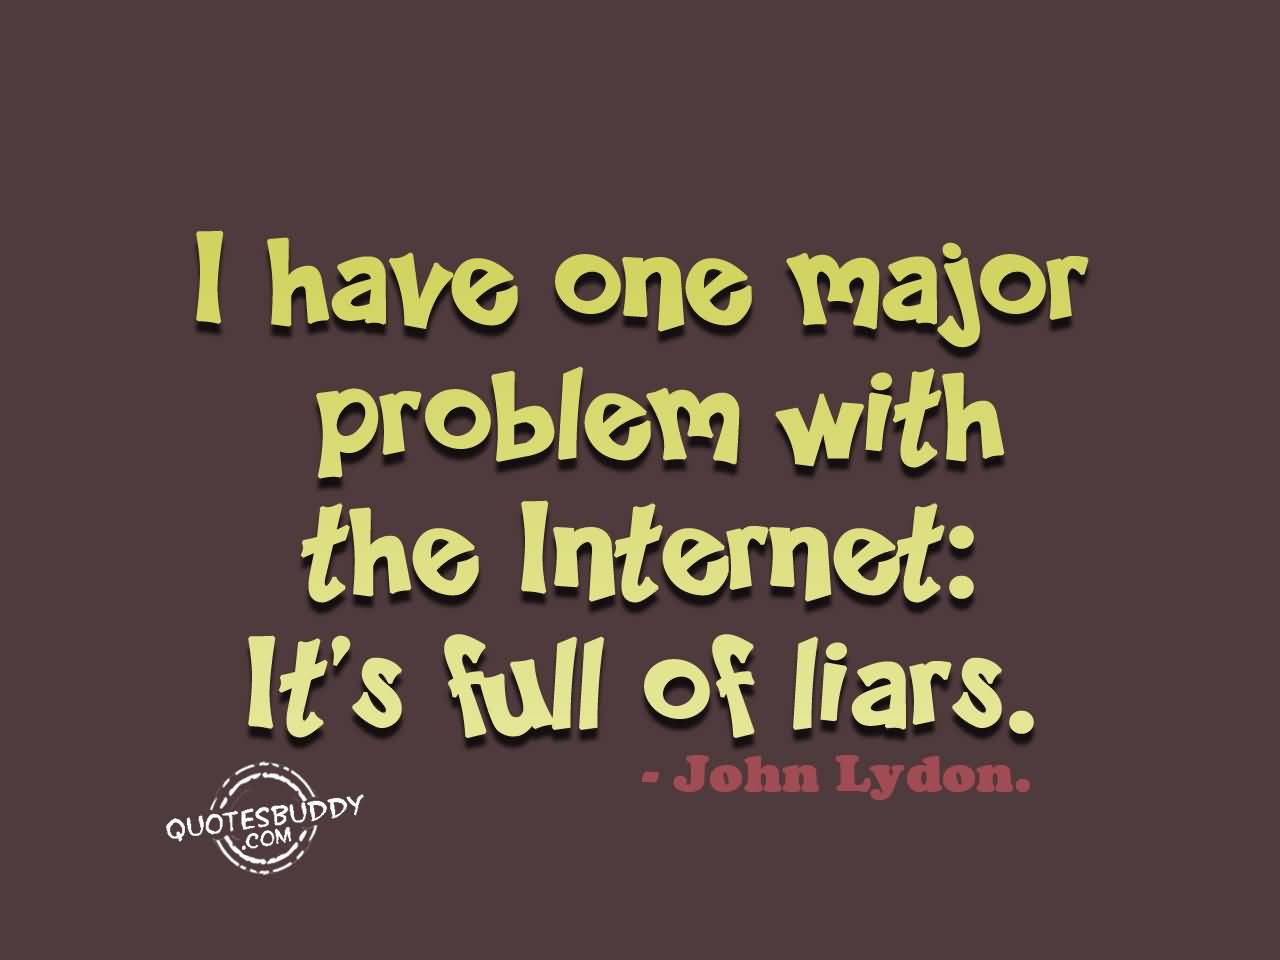 I have one major problem with the Internet,It’s full of liars. John Lydon